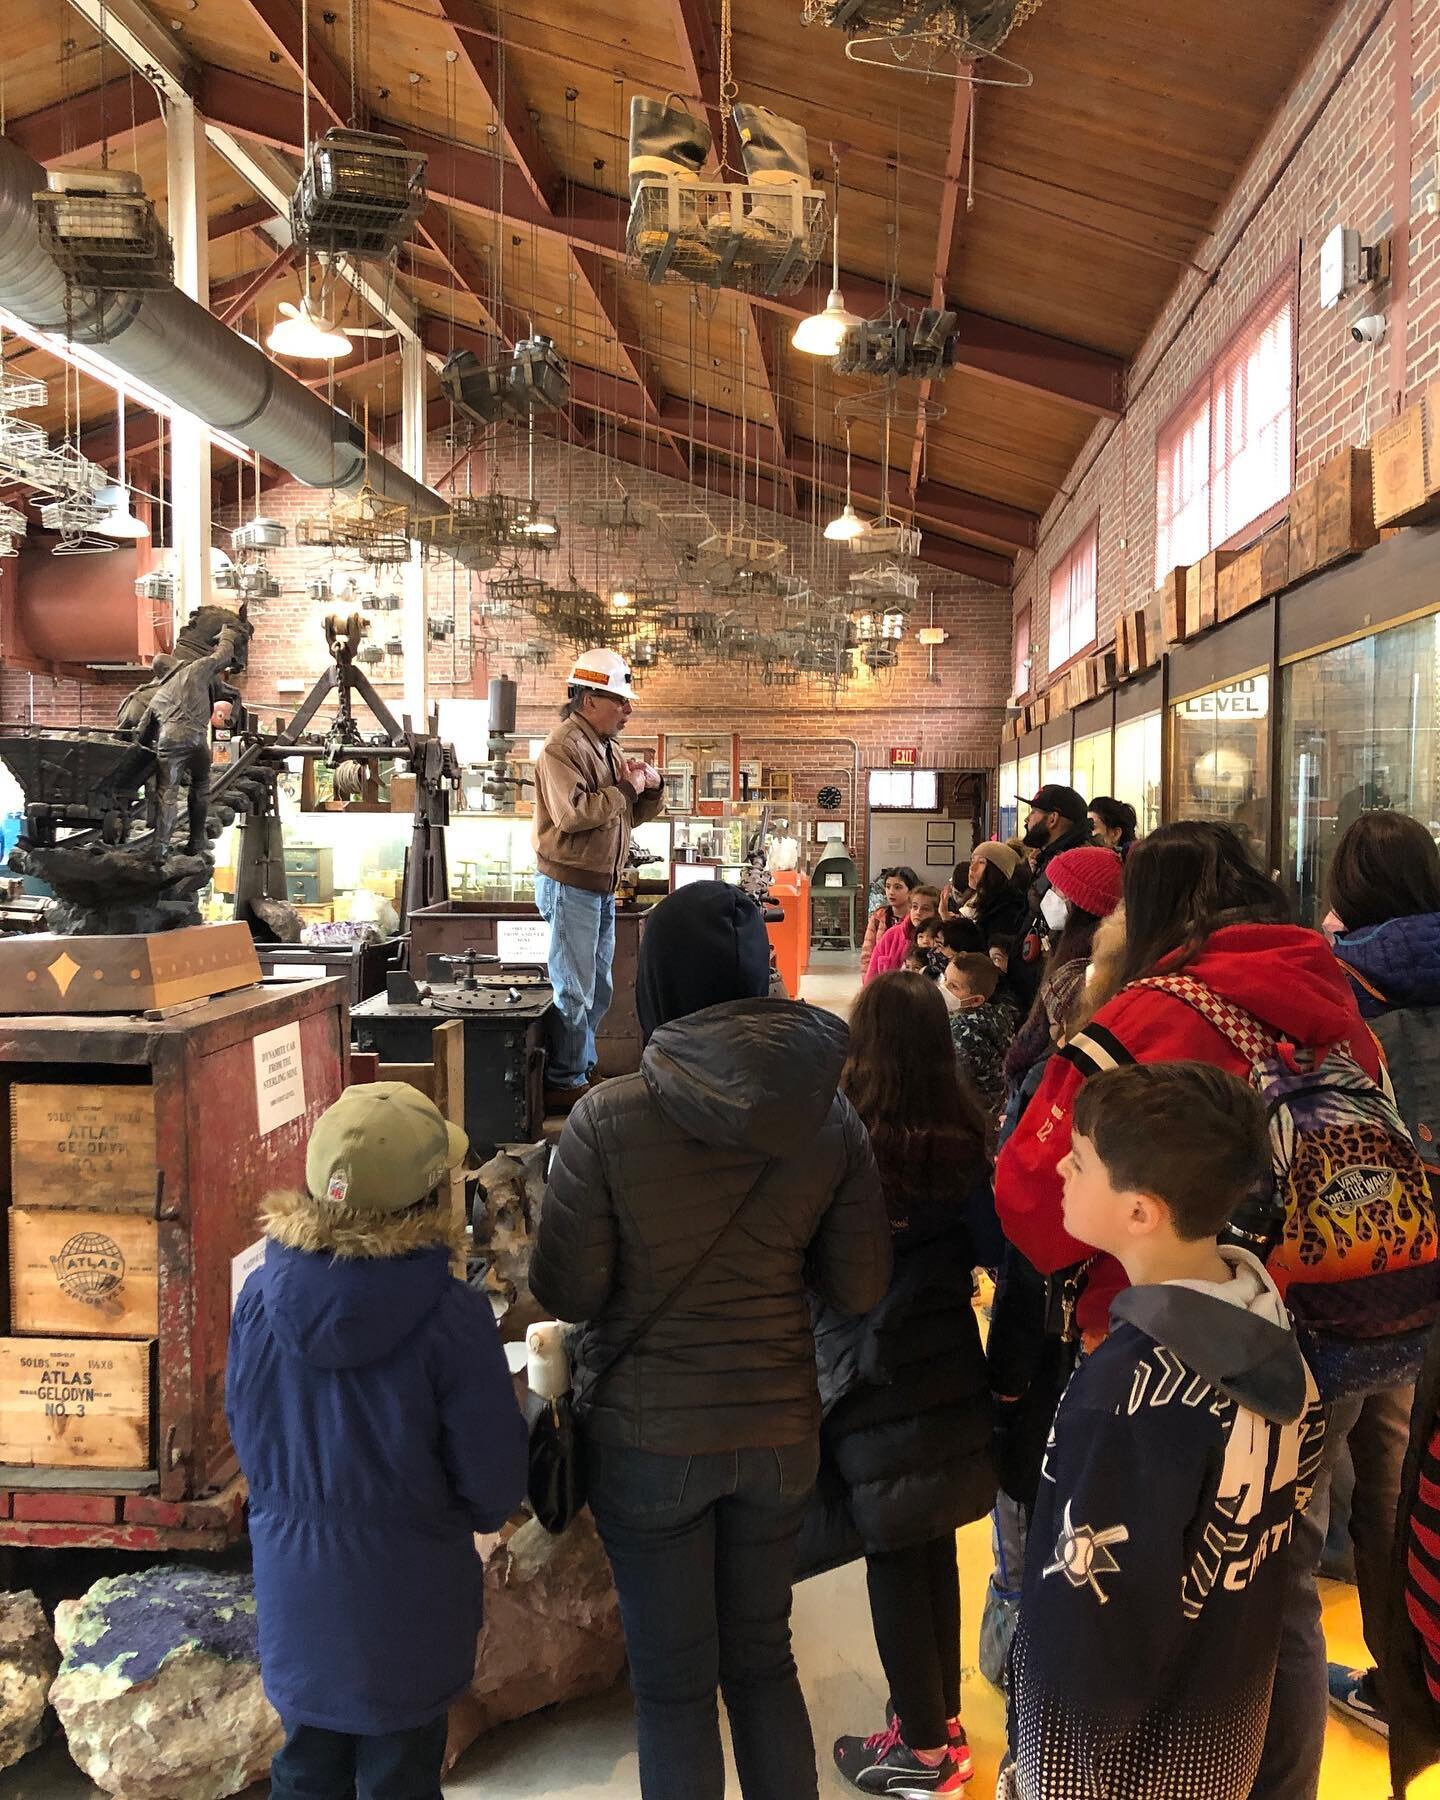 With some help from the @velaedfund we organized a homeschool community field trip to @sterlinghillminingmuseum on a big school bus. Thanks Vela!